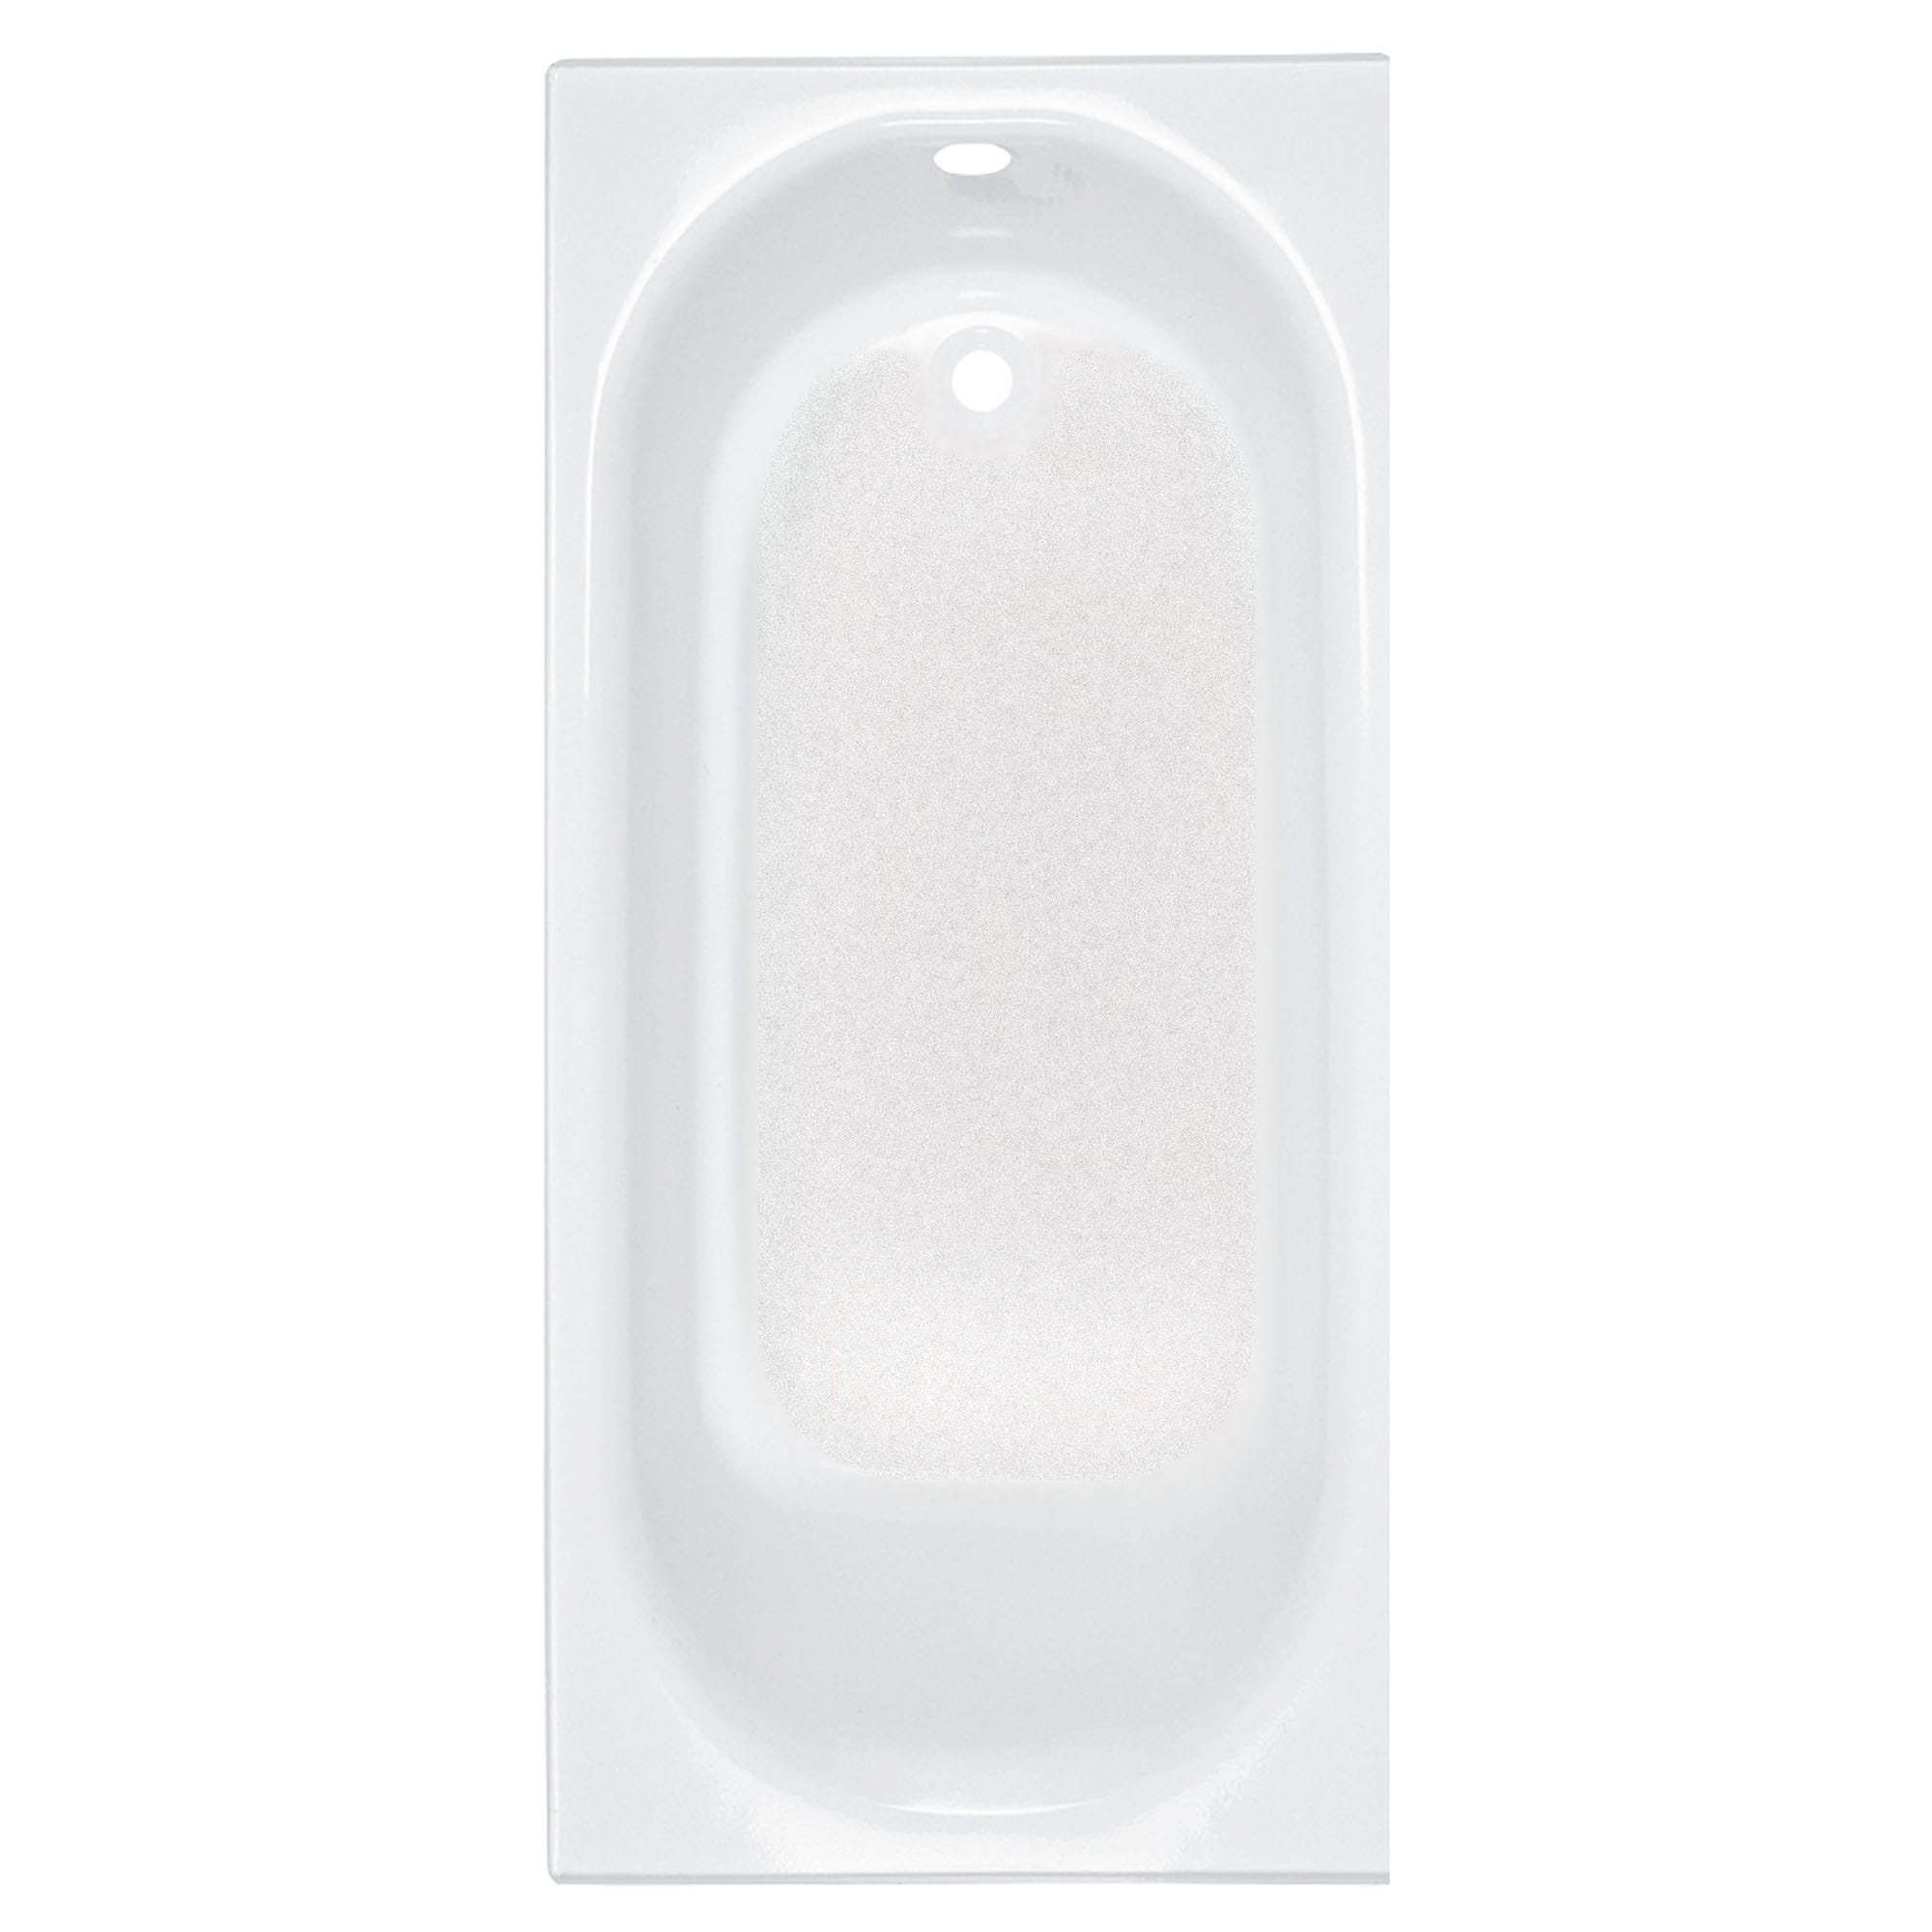 Princeton Americast 60 x 30 Inch Integral Apron Bathtub With Left Hand Outlet ARCTIC